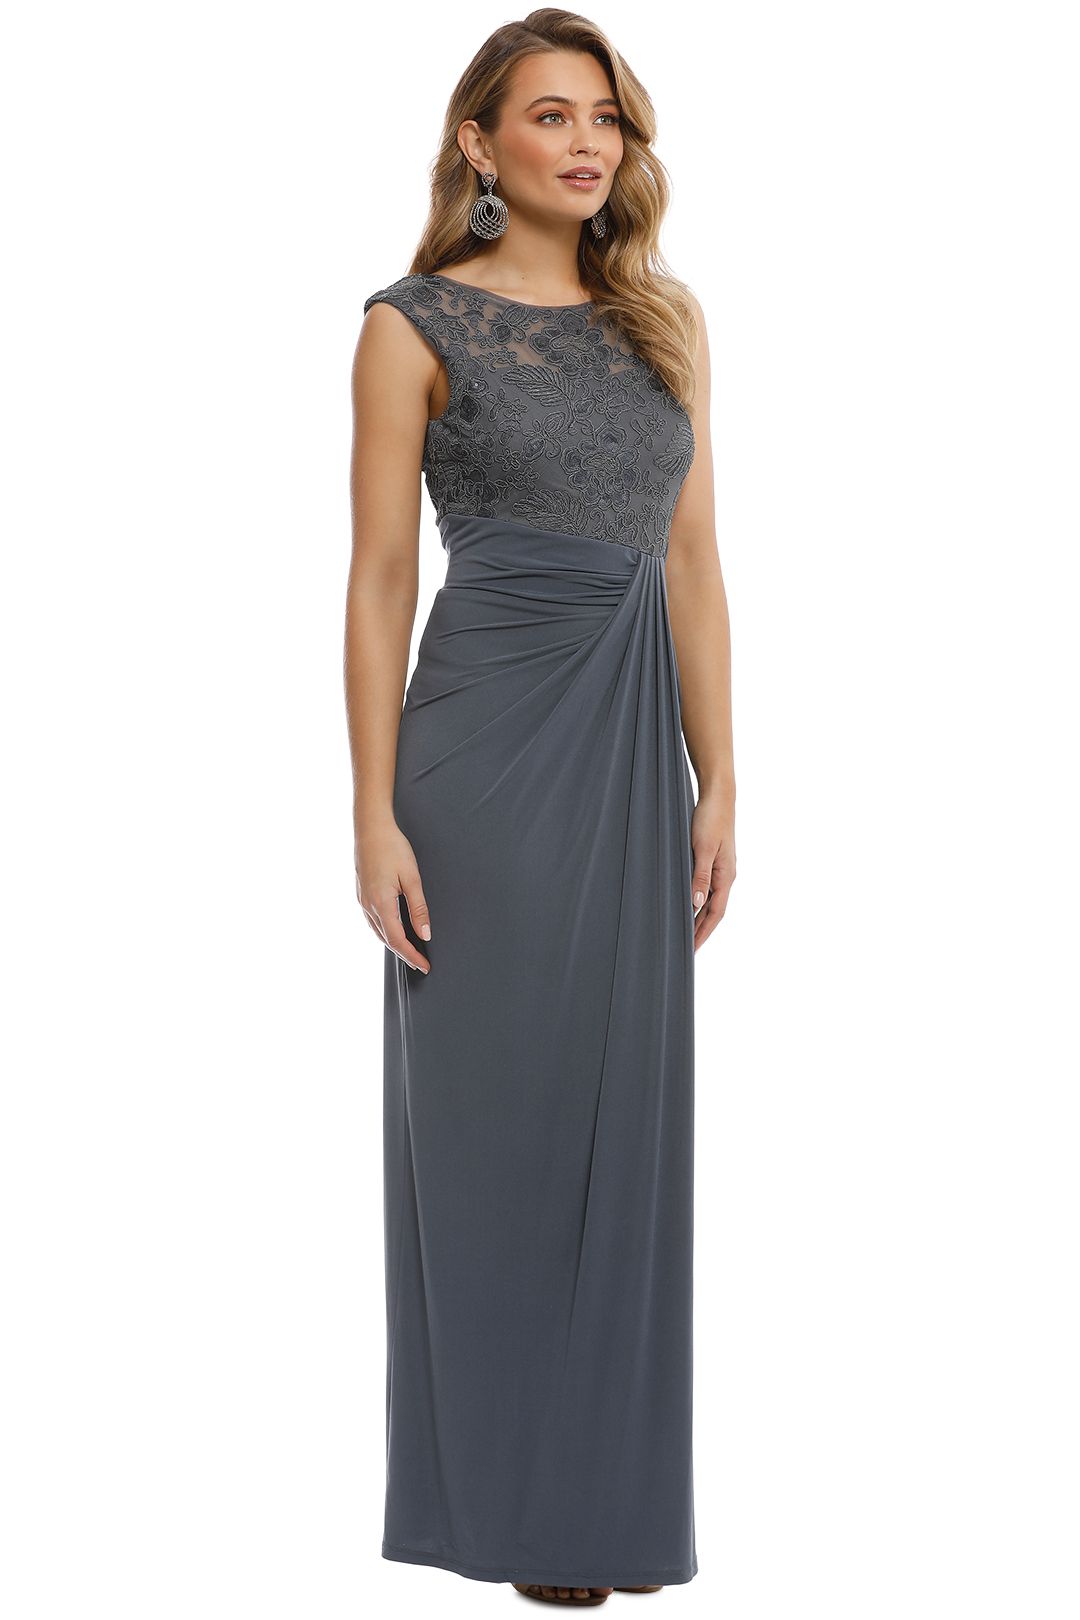 Montique - Maya Embroidered Gown - Grey - Side